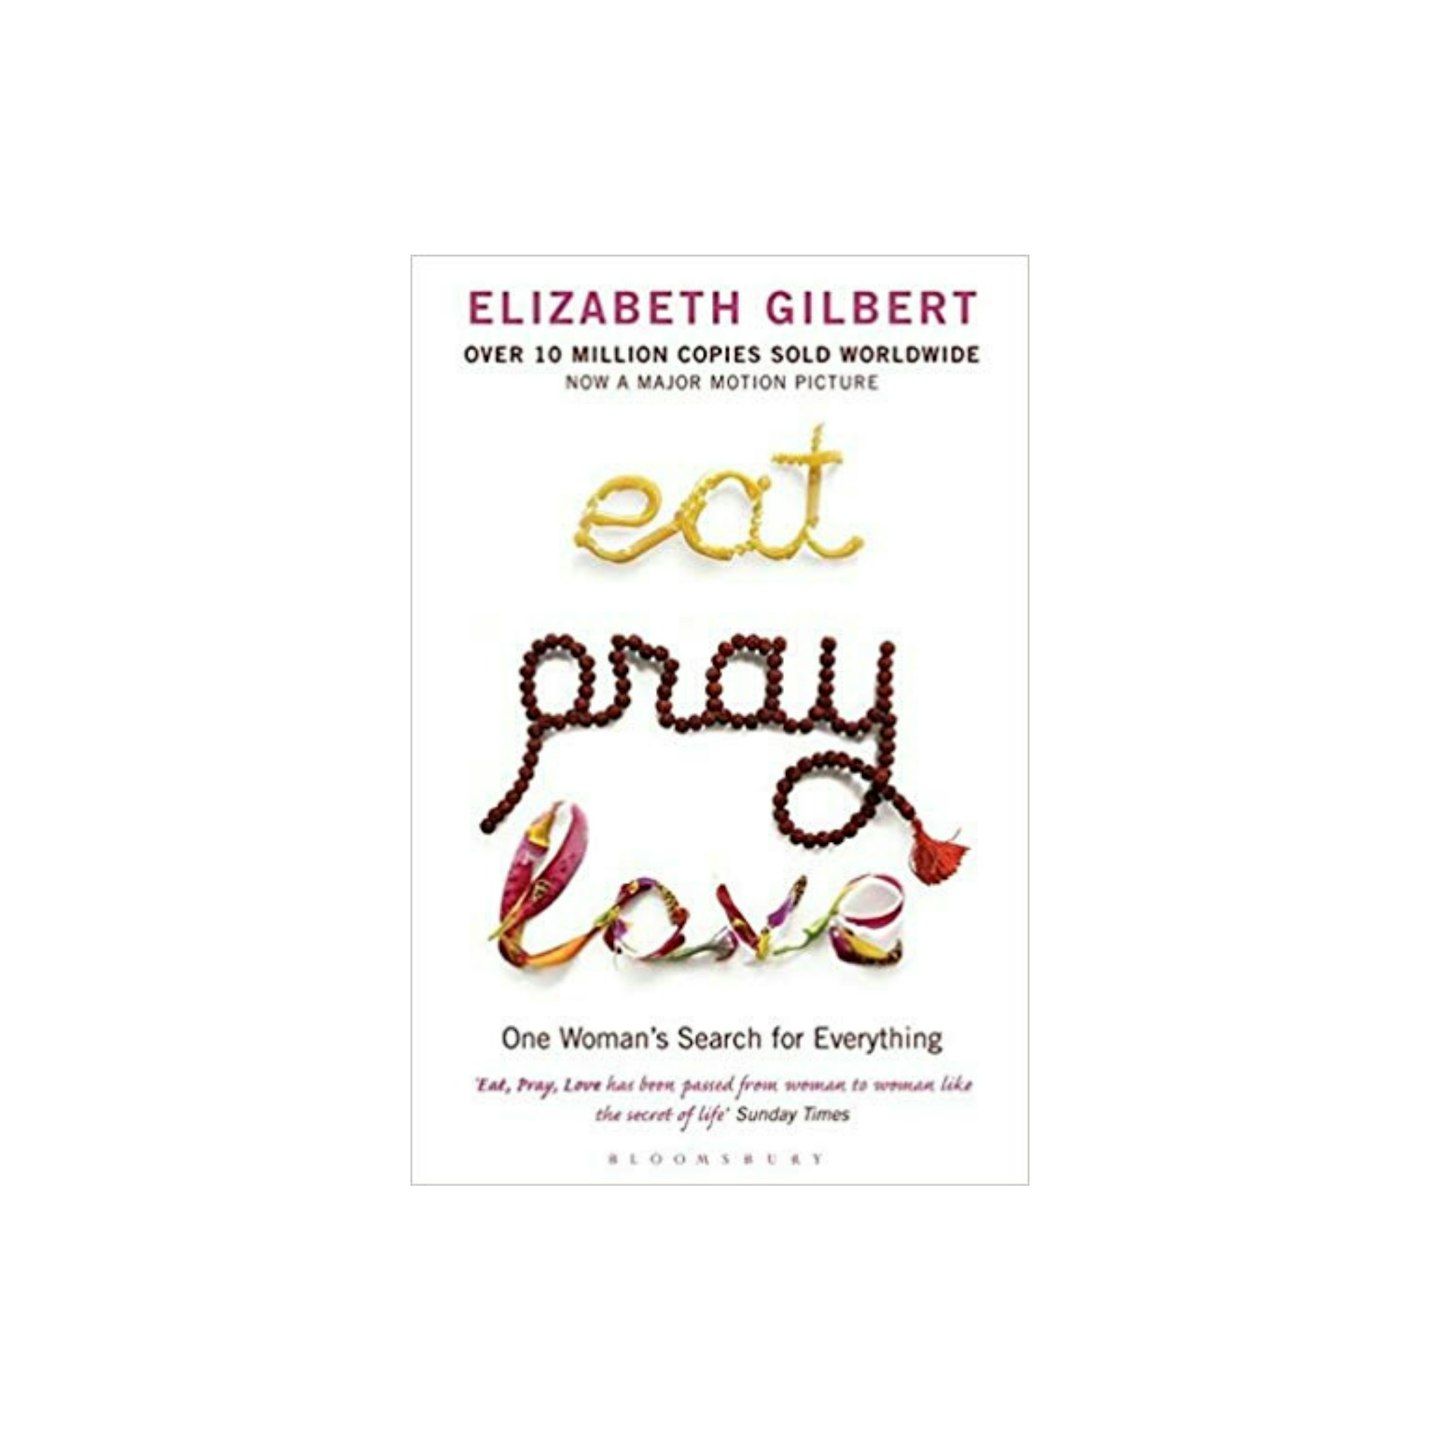 Eat, Pray, Love: One Woman's Search for Everything by Elizabeth Gilbert